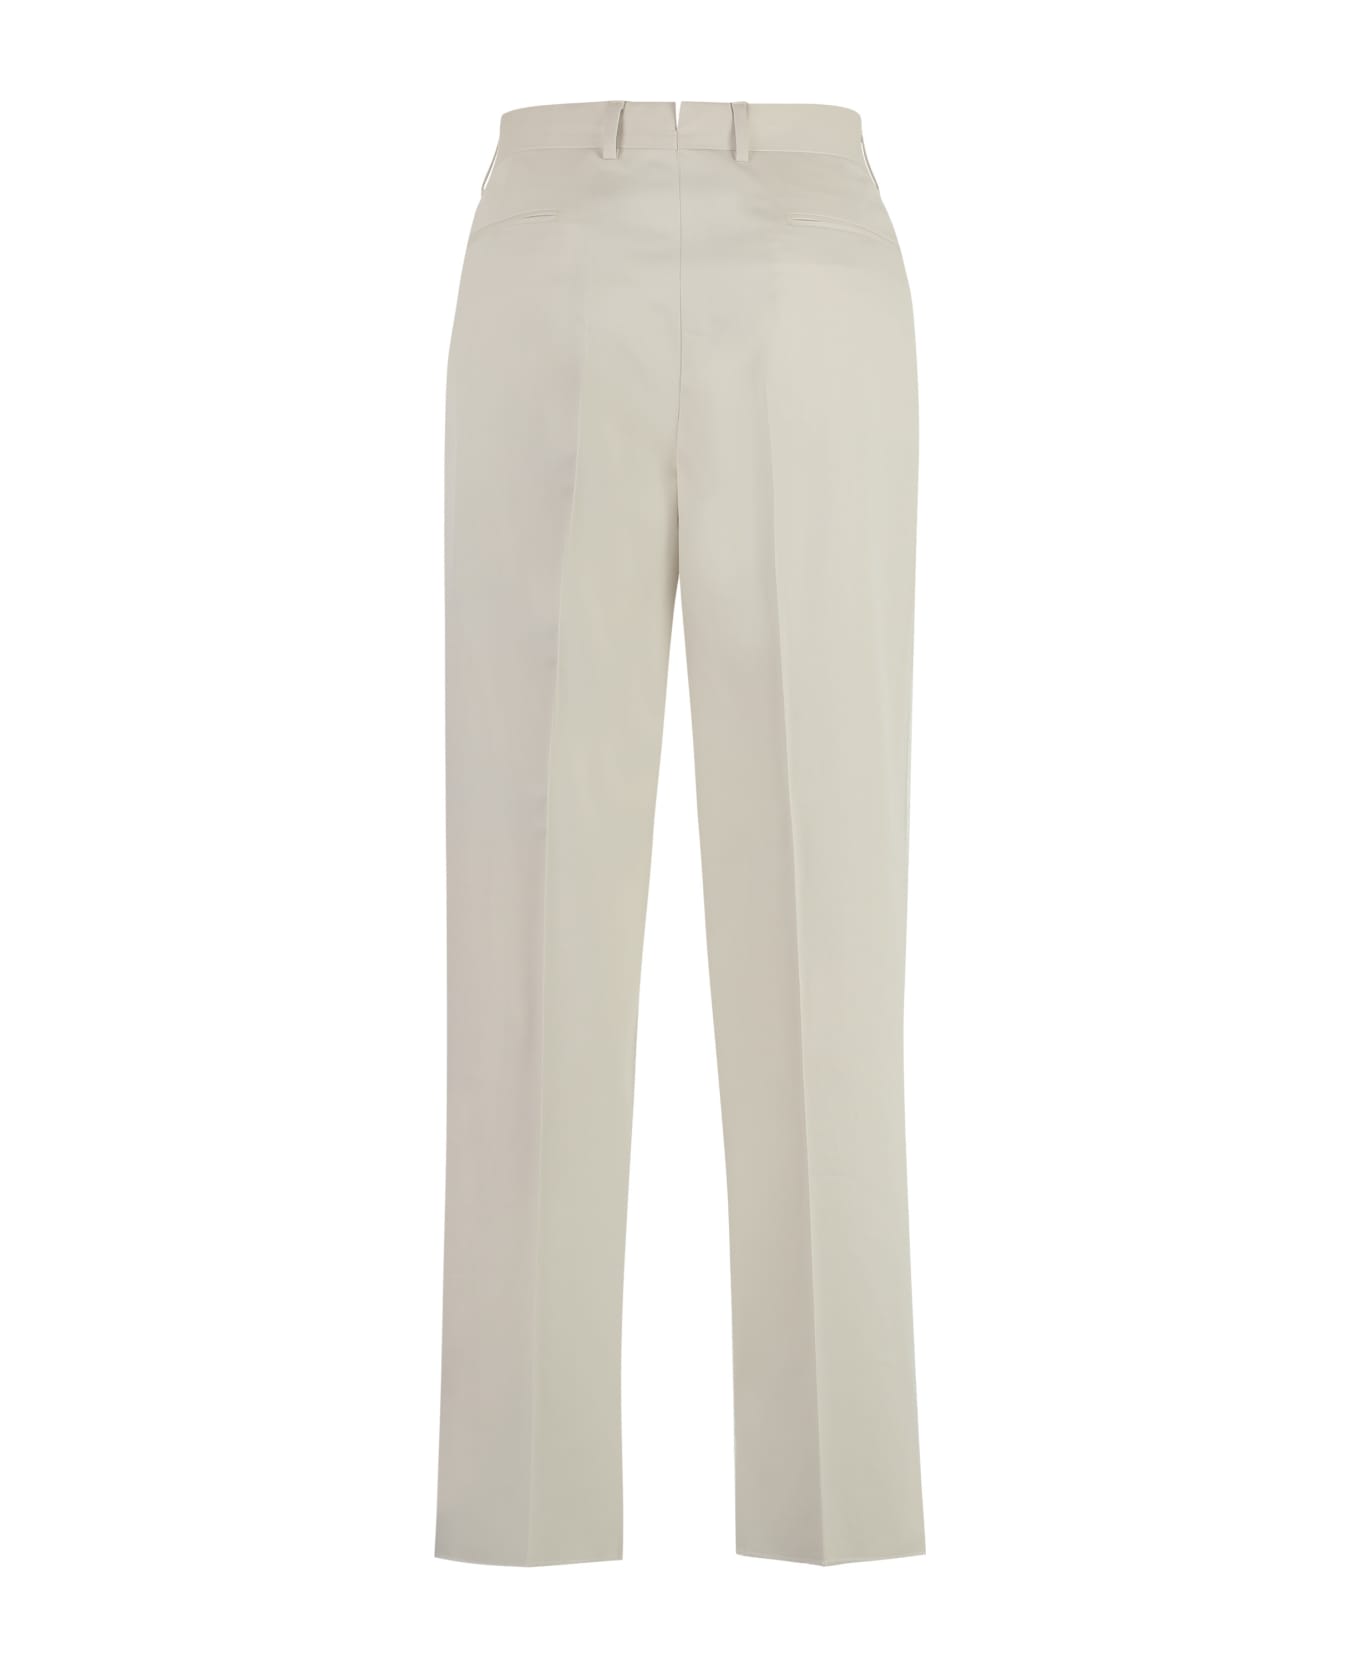 Zegna Stretch Cotton Chino Trousers - Ivory